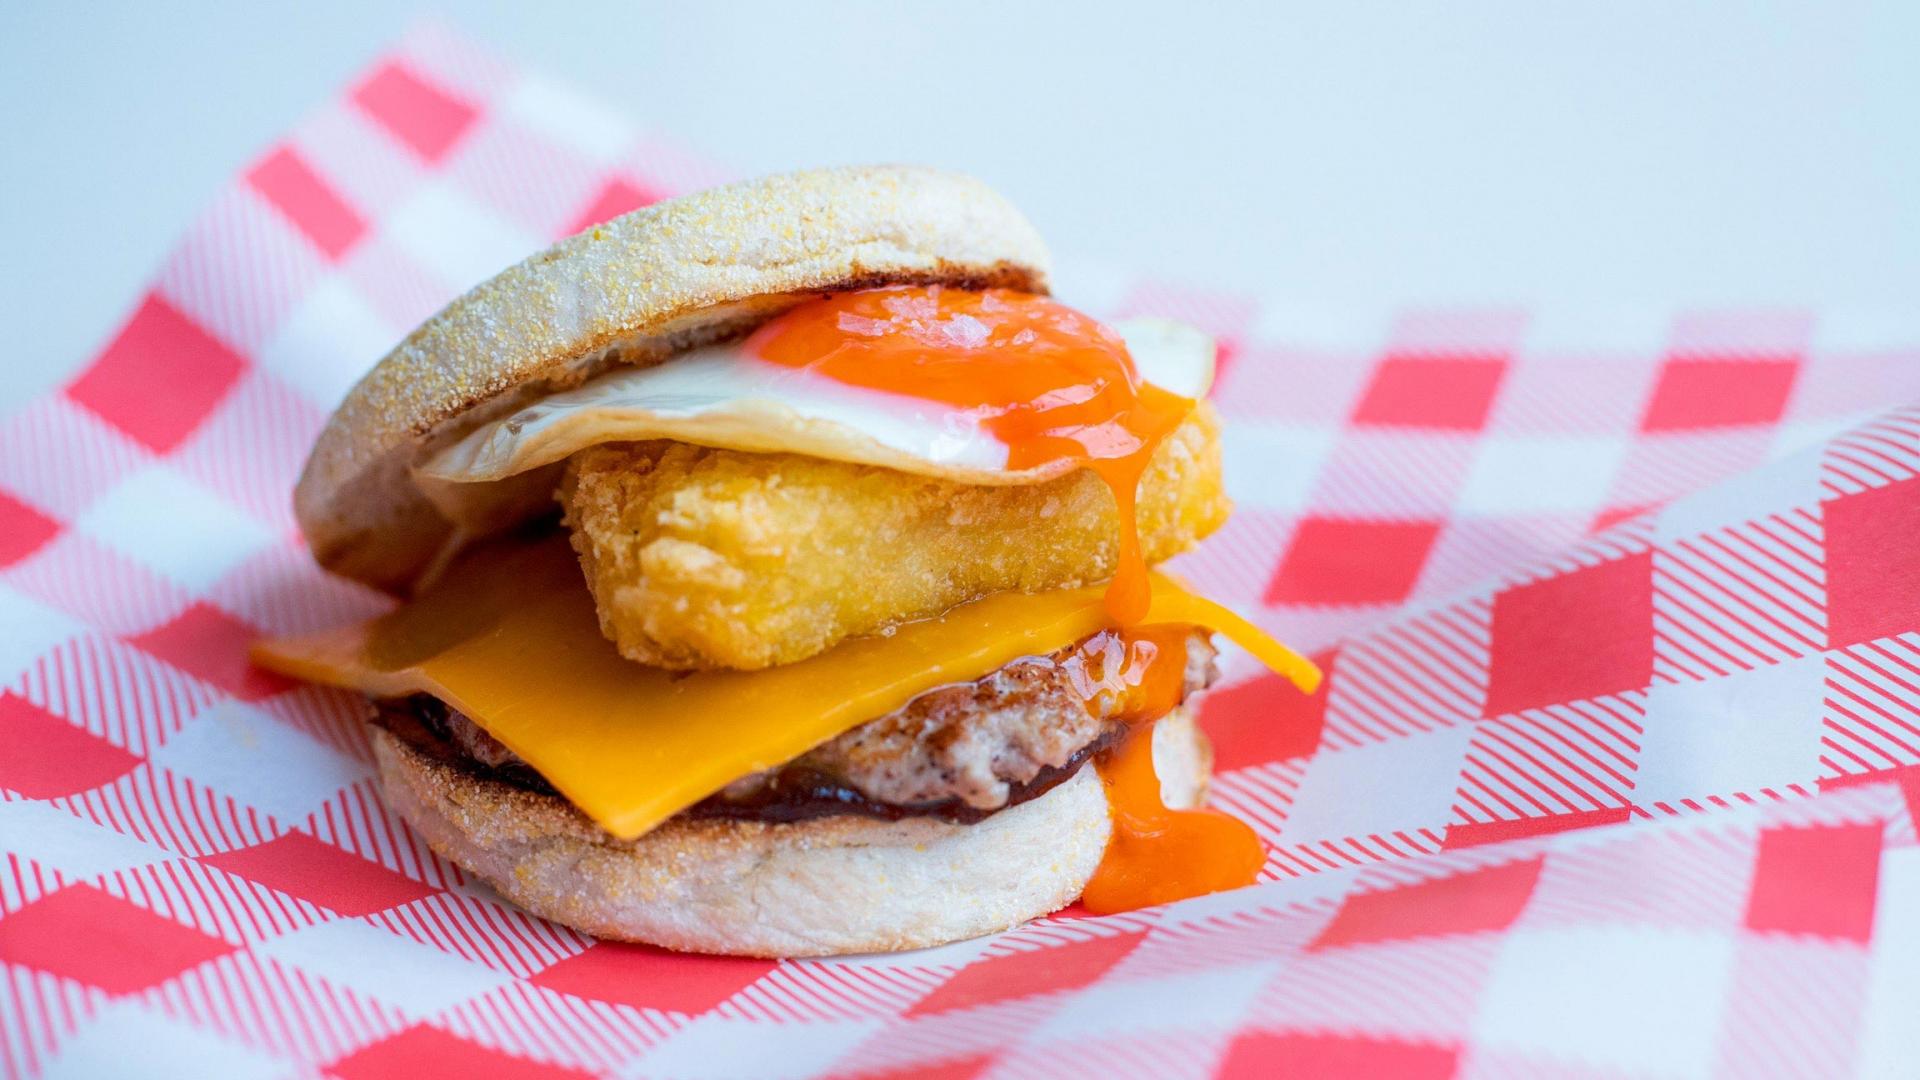 Best brunch London: Norman's Cafe in Tufnell Park's breakfast muffin, with sausage patty, a hash brown, a fried egg and red leicester cheese